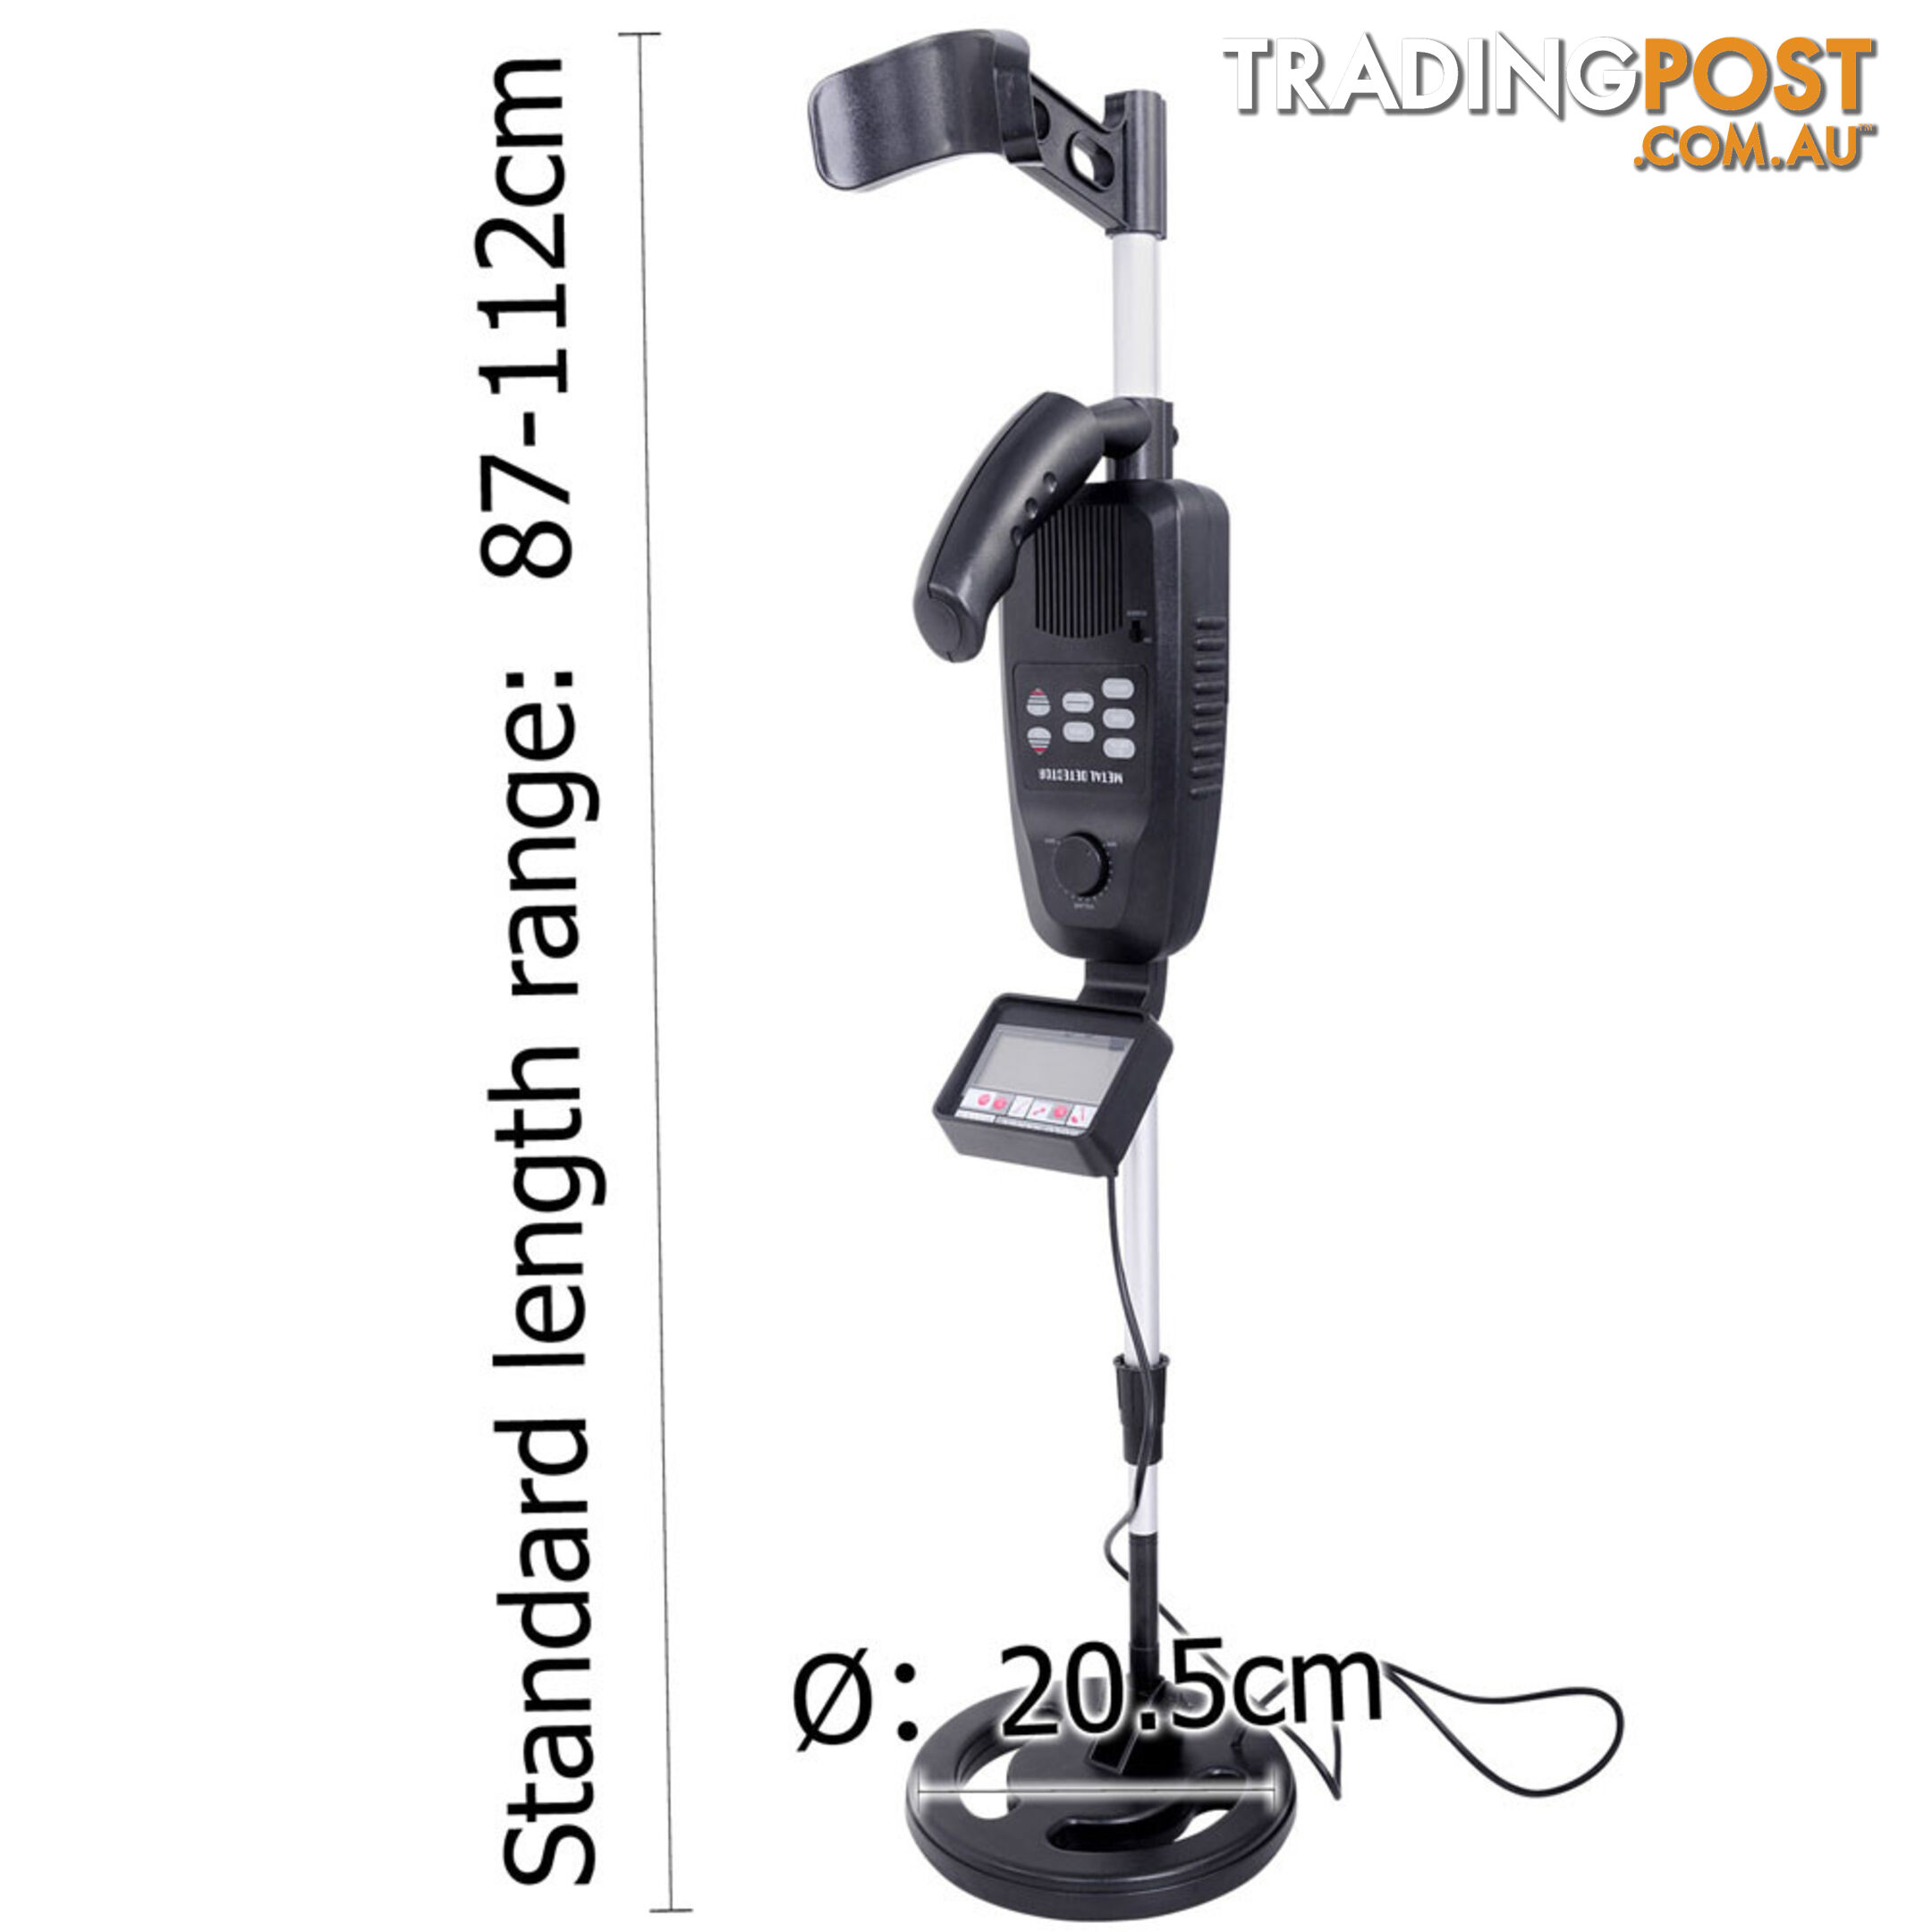 Deep Searching Sensitive Metal Detector w/ LCD System Readout